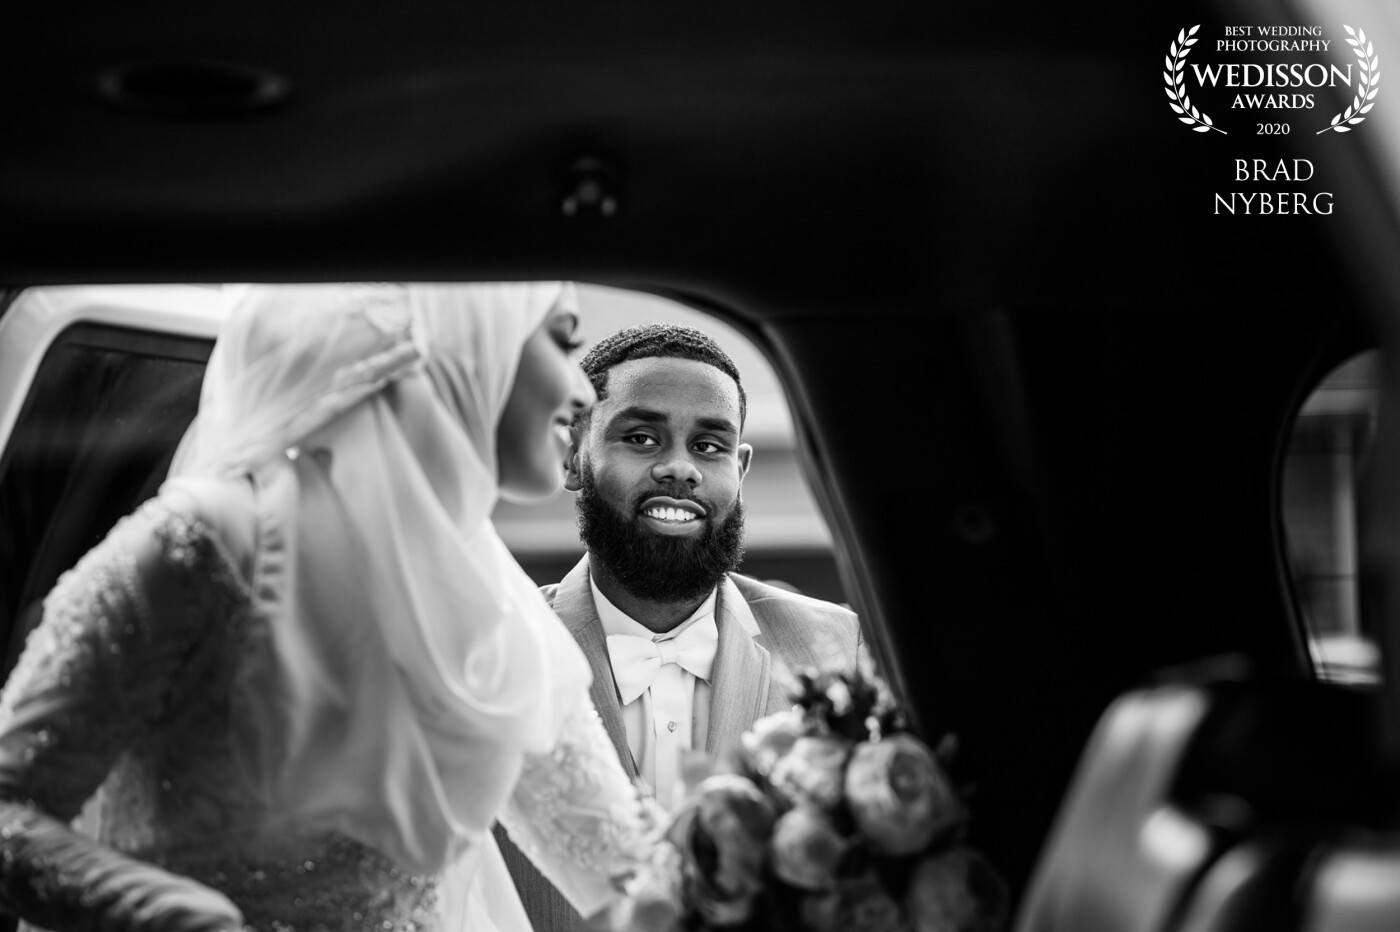 Lensa and Hamdi had an amazing wedding.  My wife captured this moment from the opposite angle, and I grabbed the shot from inside the limo.  Hamdi's expression toward his new bride still melts the heart. 